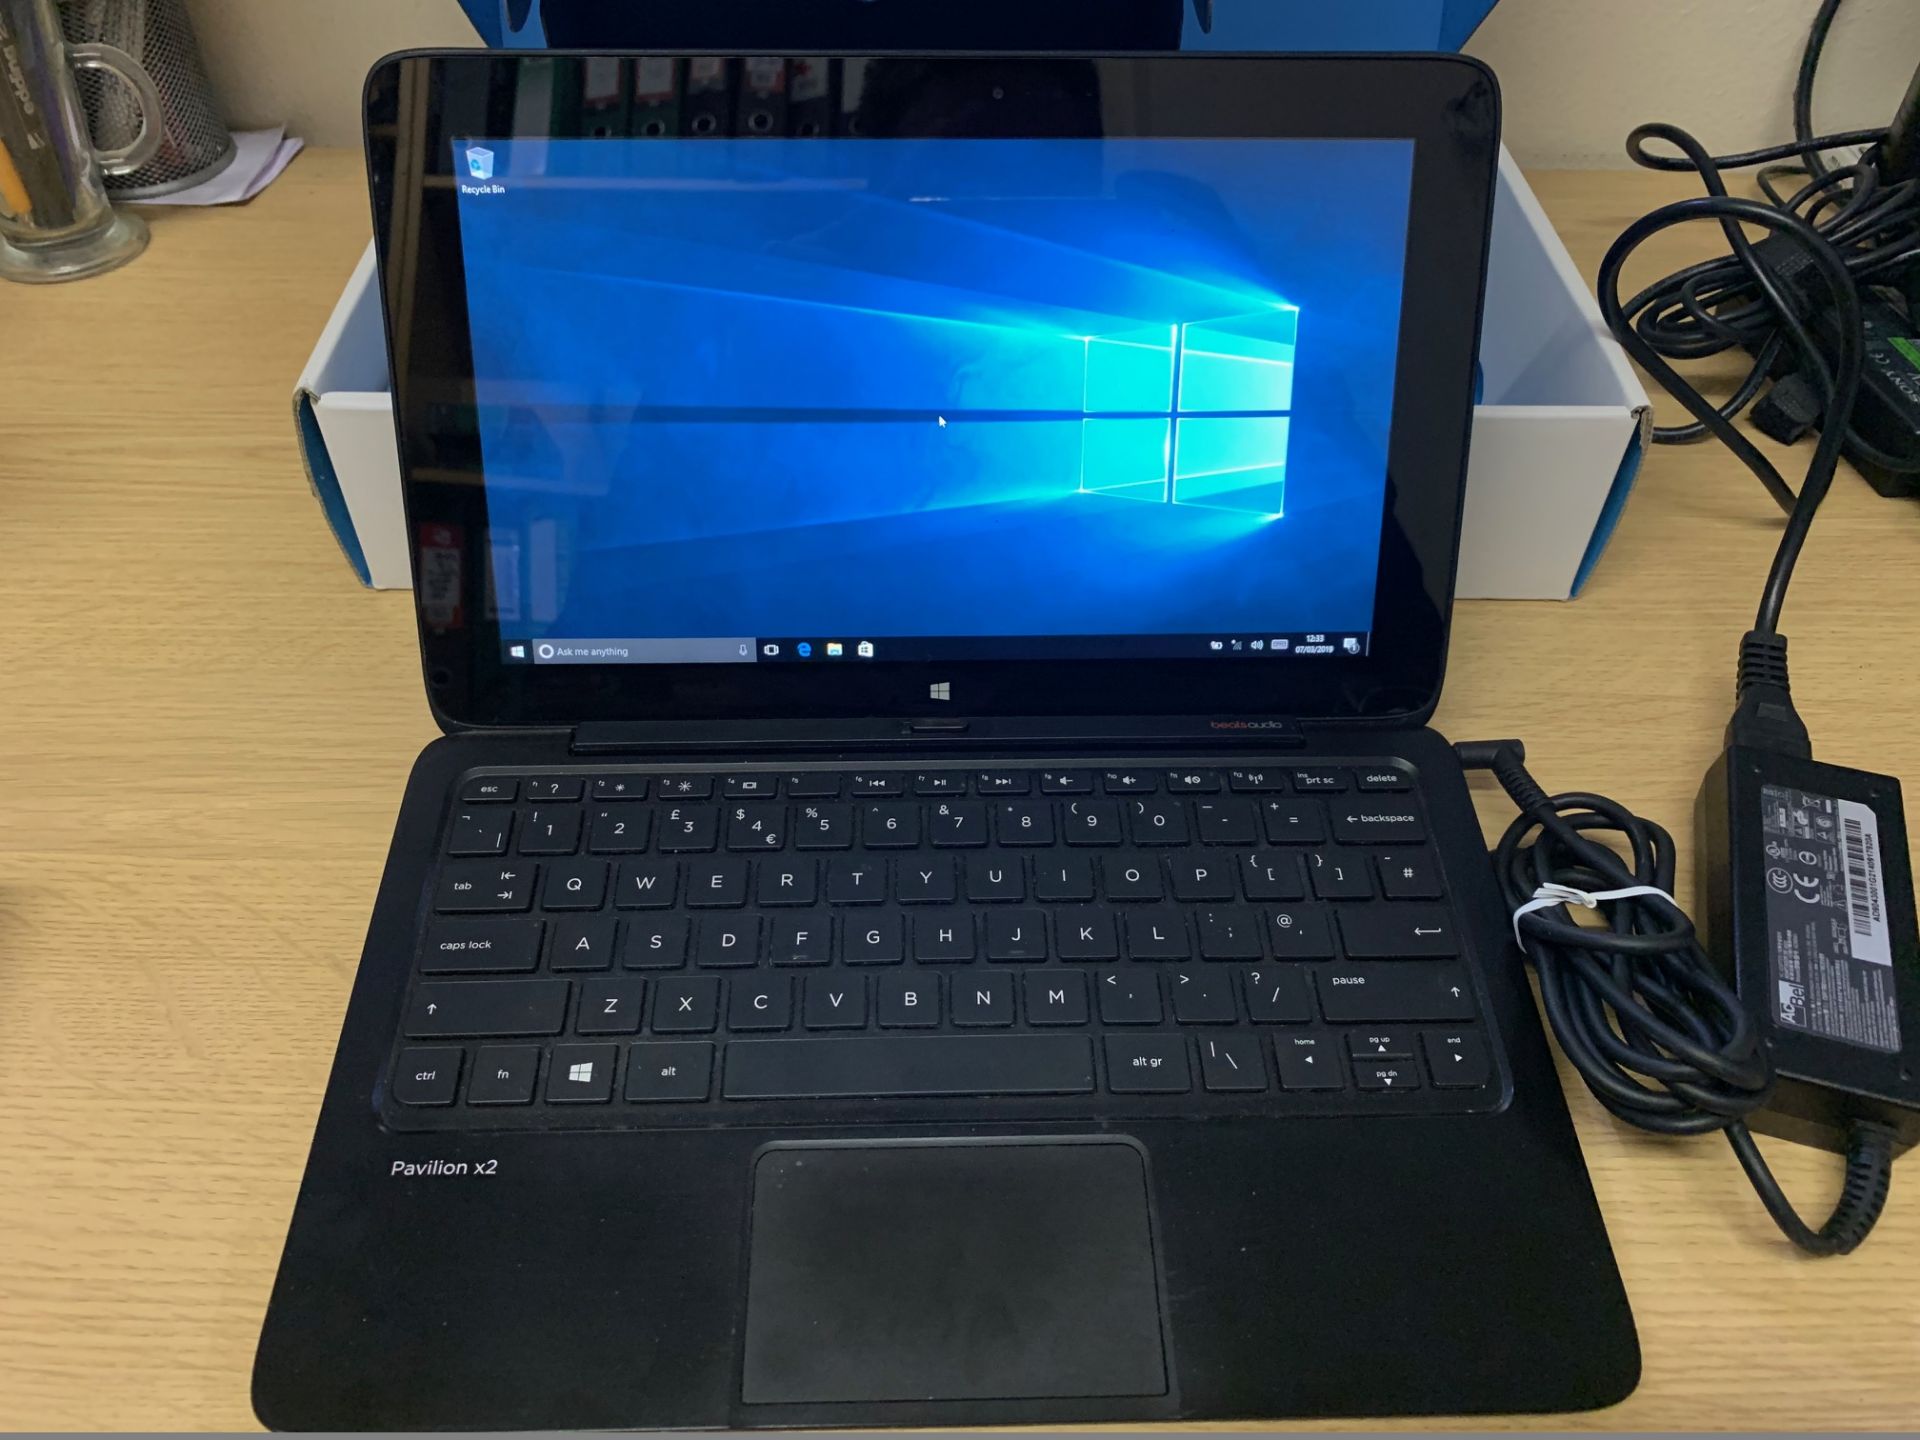 HP Envy Atom 22760 - 1.80GHz, 64GB SSD, 2GB RAM, Loaded With Windows 10 & Comes Boxed With Charger